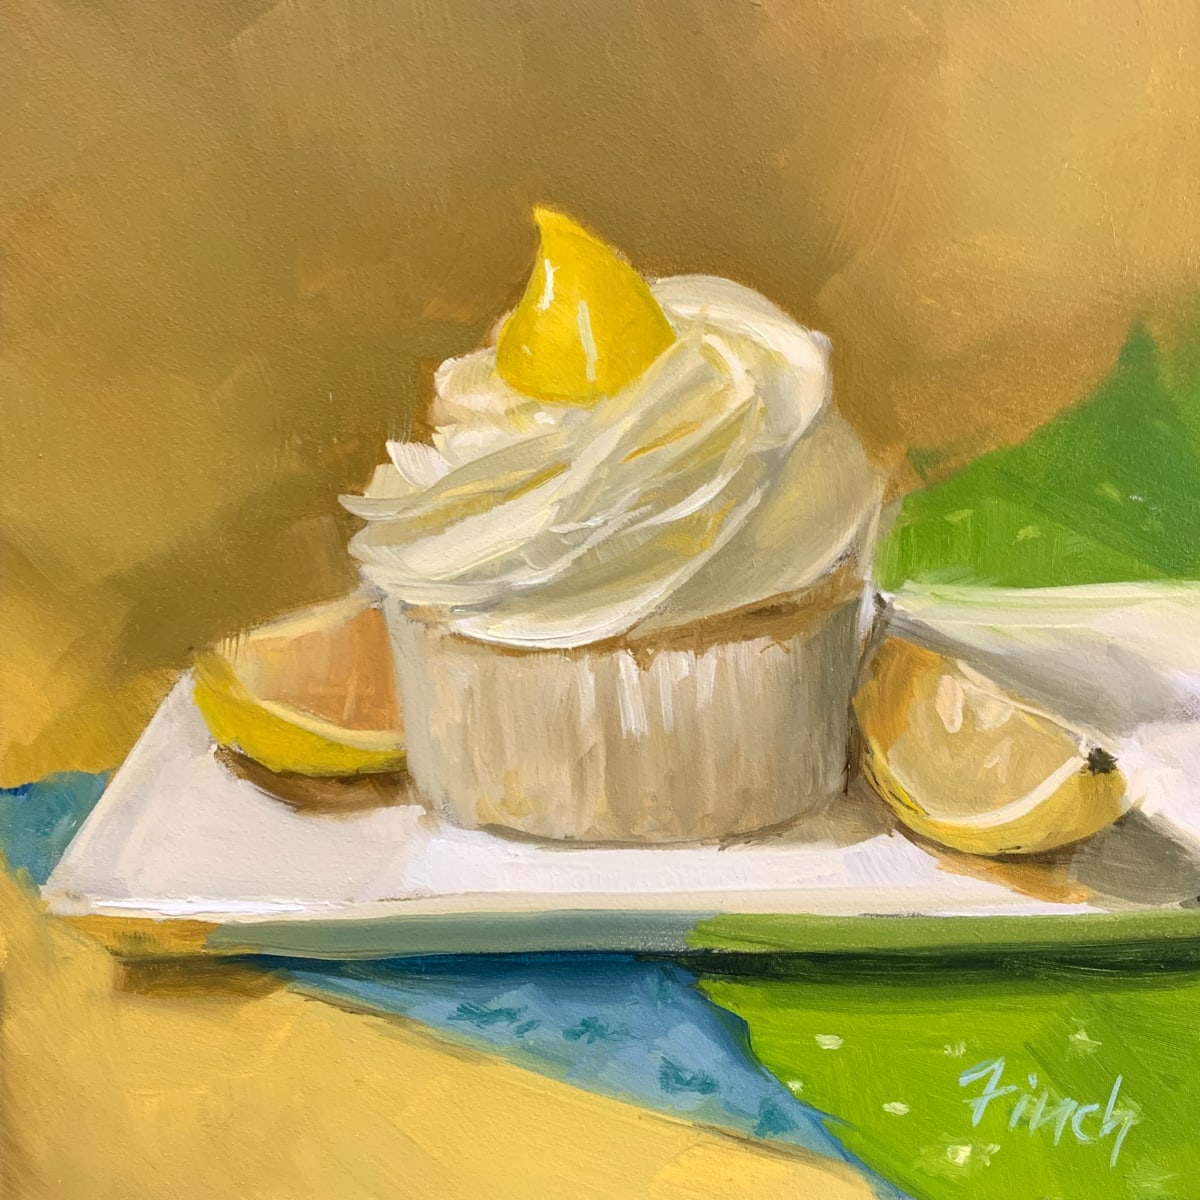 Lemon Reverie by Rebecca Finch  Image: This lovely lady was found at Poppleton Bakery and Cafe in Corning, NY and she was delicious!